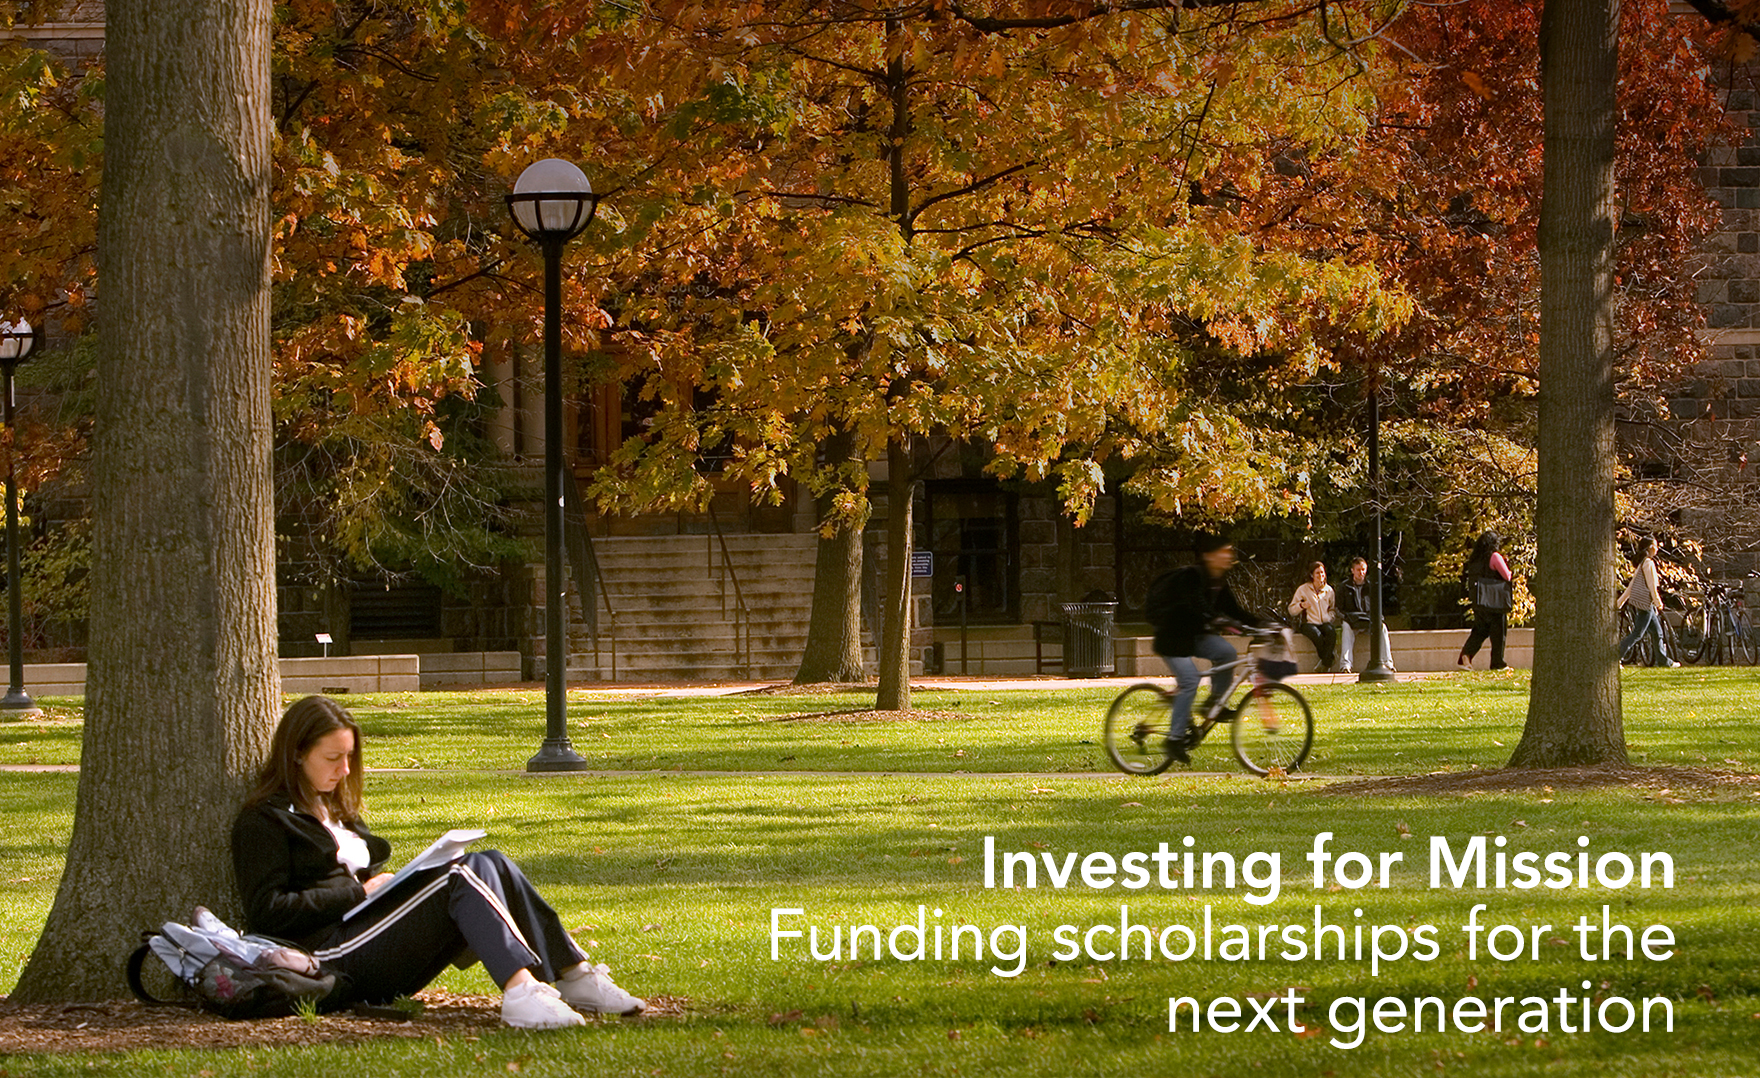 Investing for Mission | Funding scholarships for the next generation